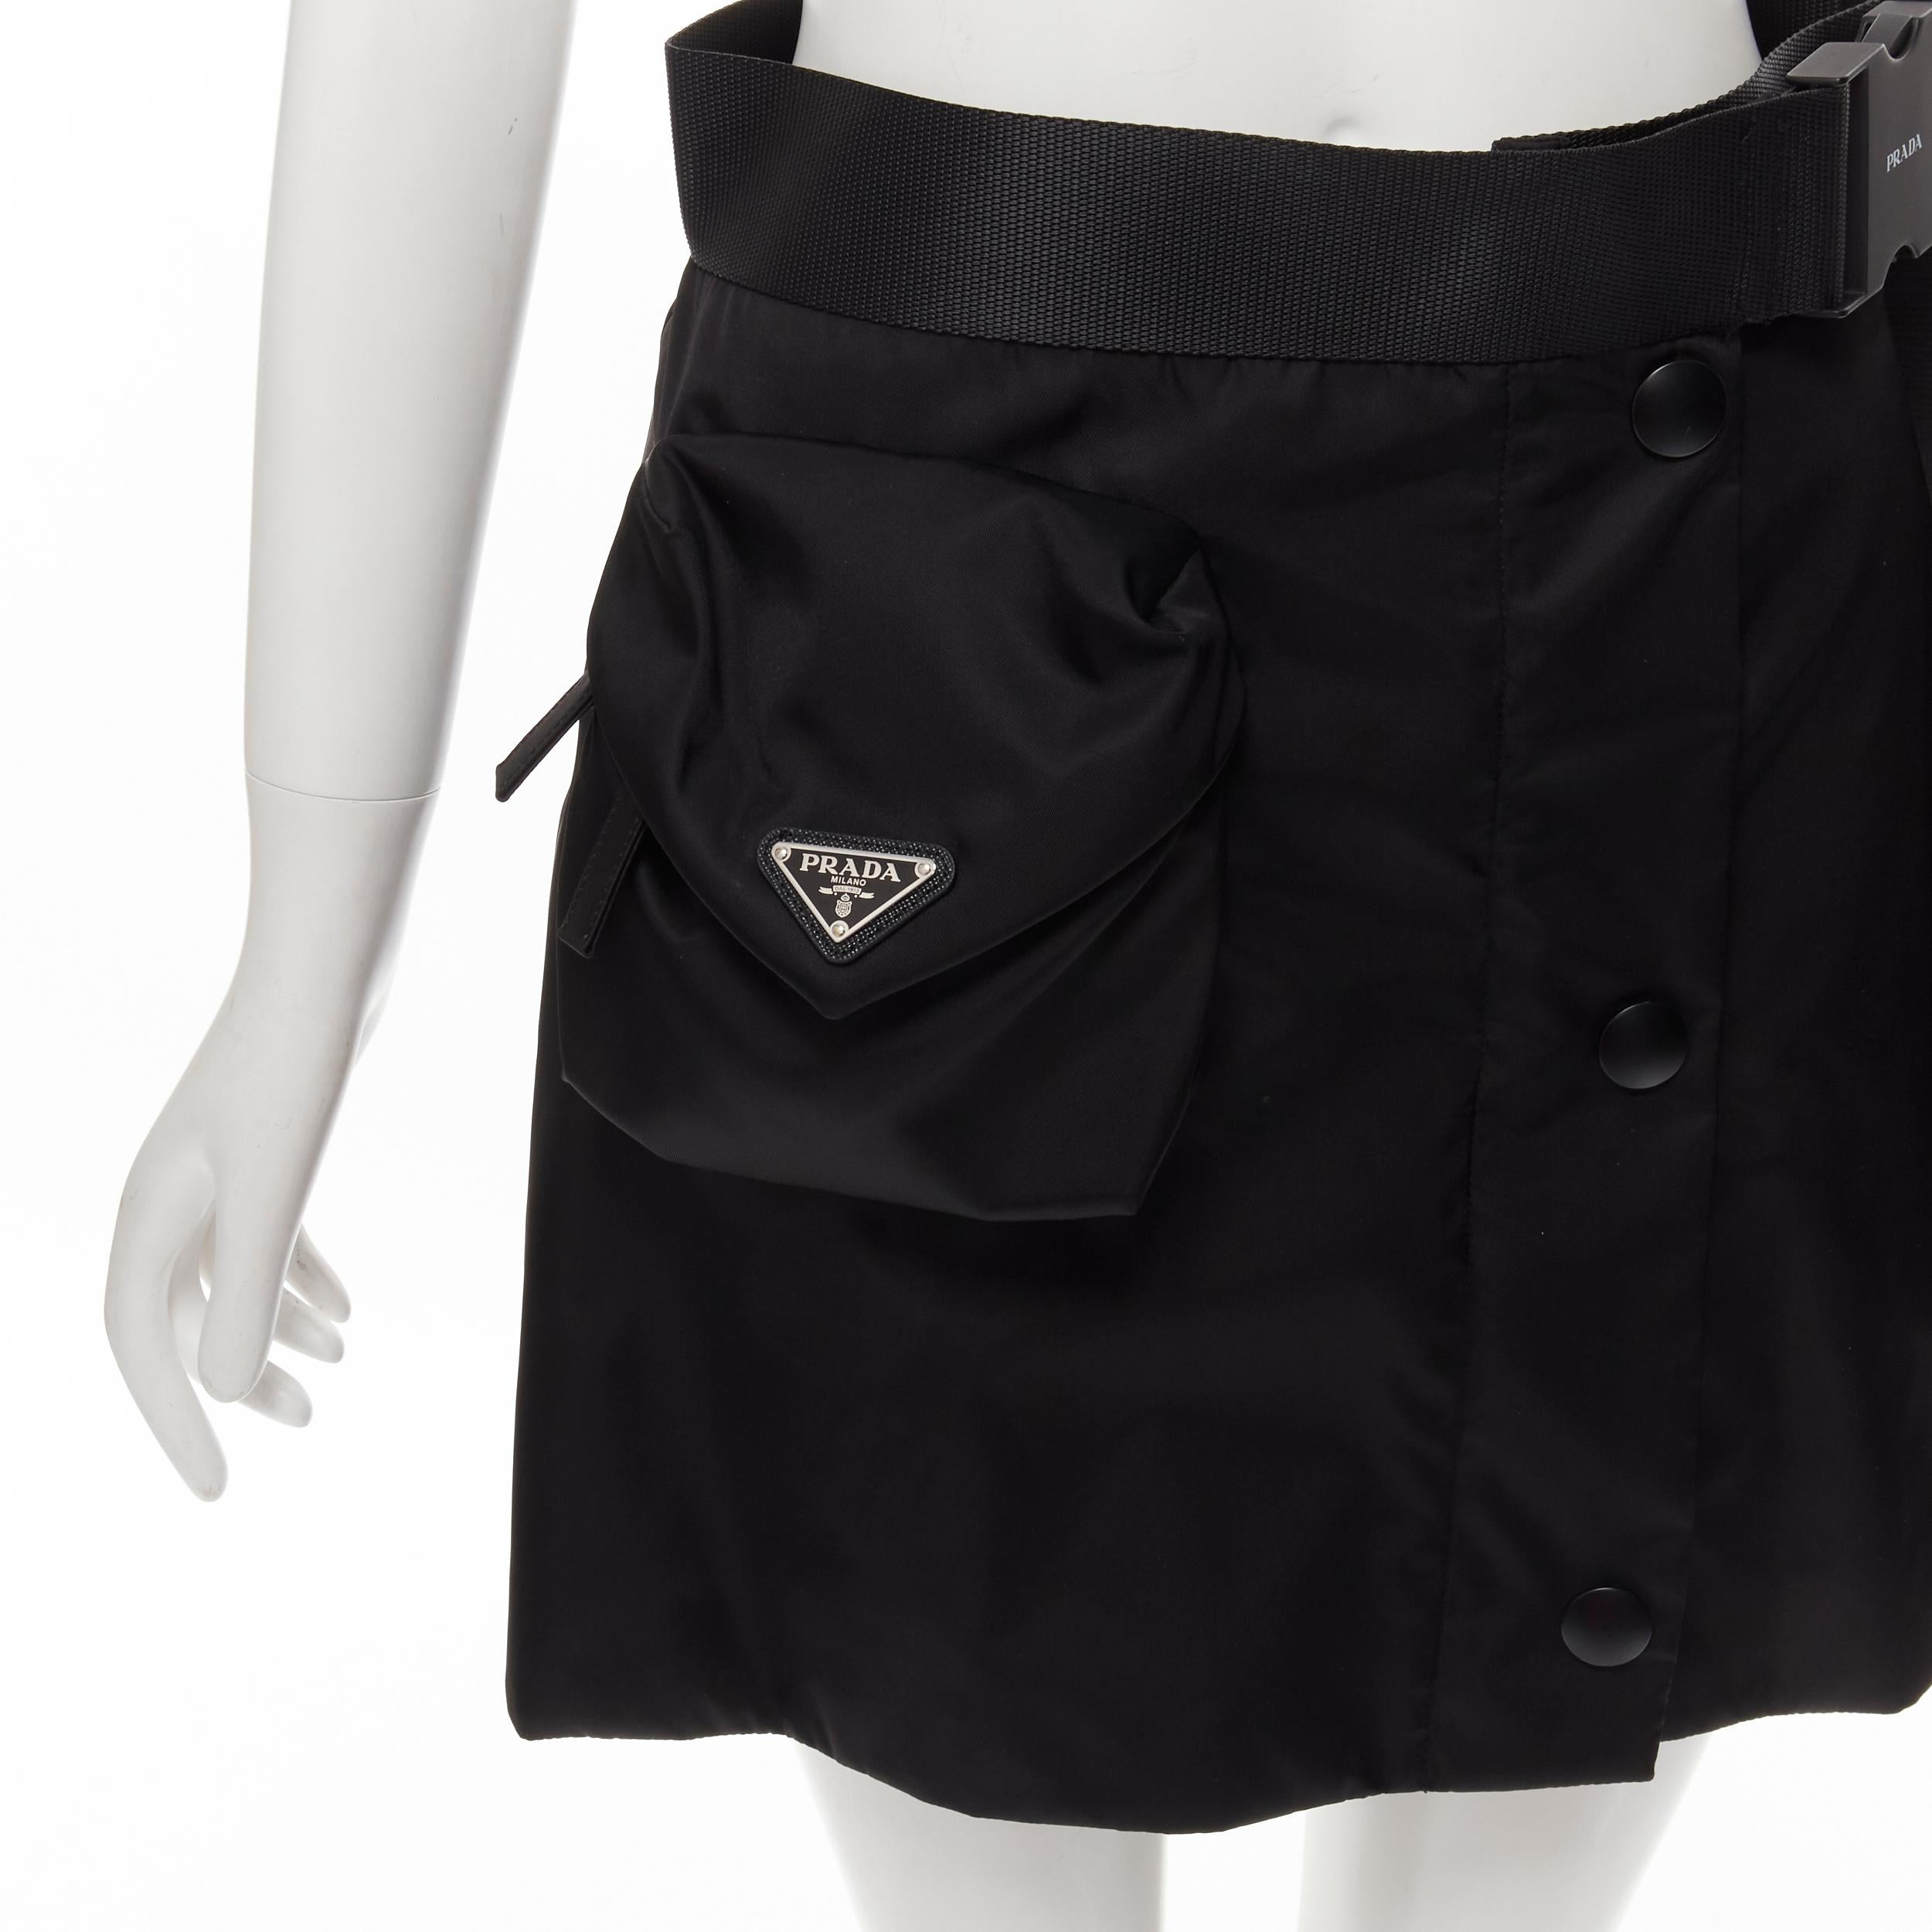 PRADA Signature Triangle flap pouch pocket nylon belted nylon skirt S
Reference: ANWU/A00444
Brand: Prada
Designer: Miuccia Prada
Material: Nylon
Color: Black
Pattern: Solid
Closure: Zip
Extra Details: Nylon trim belt with black metal buckle with